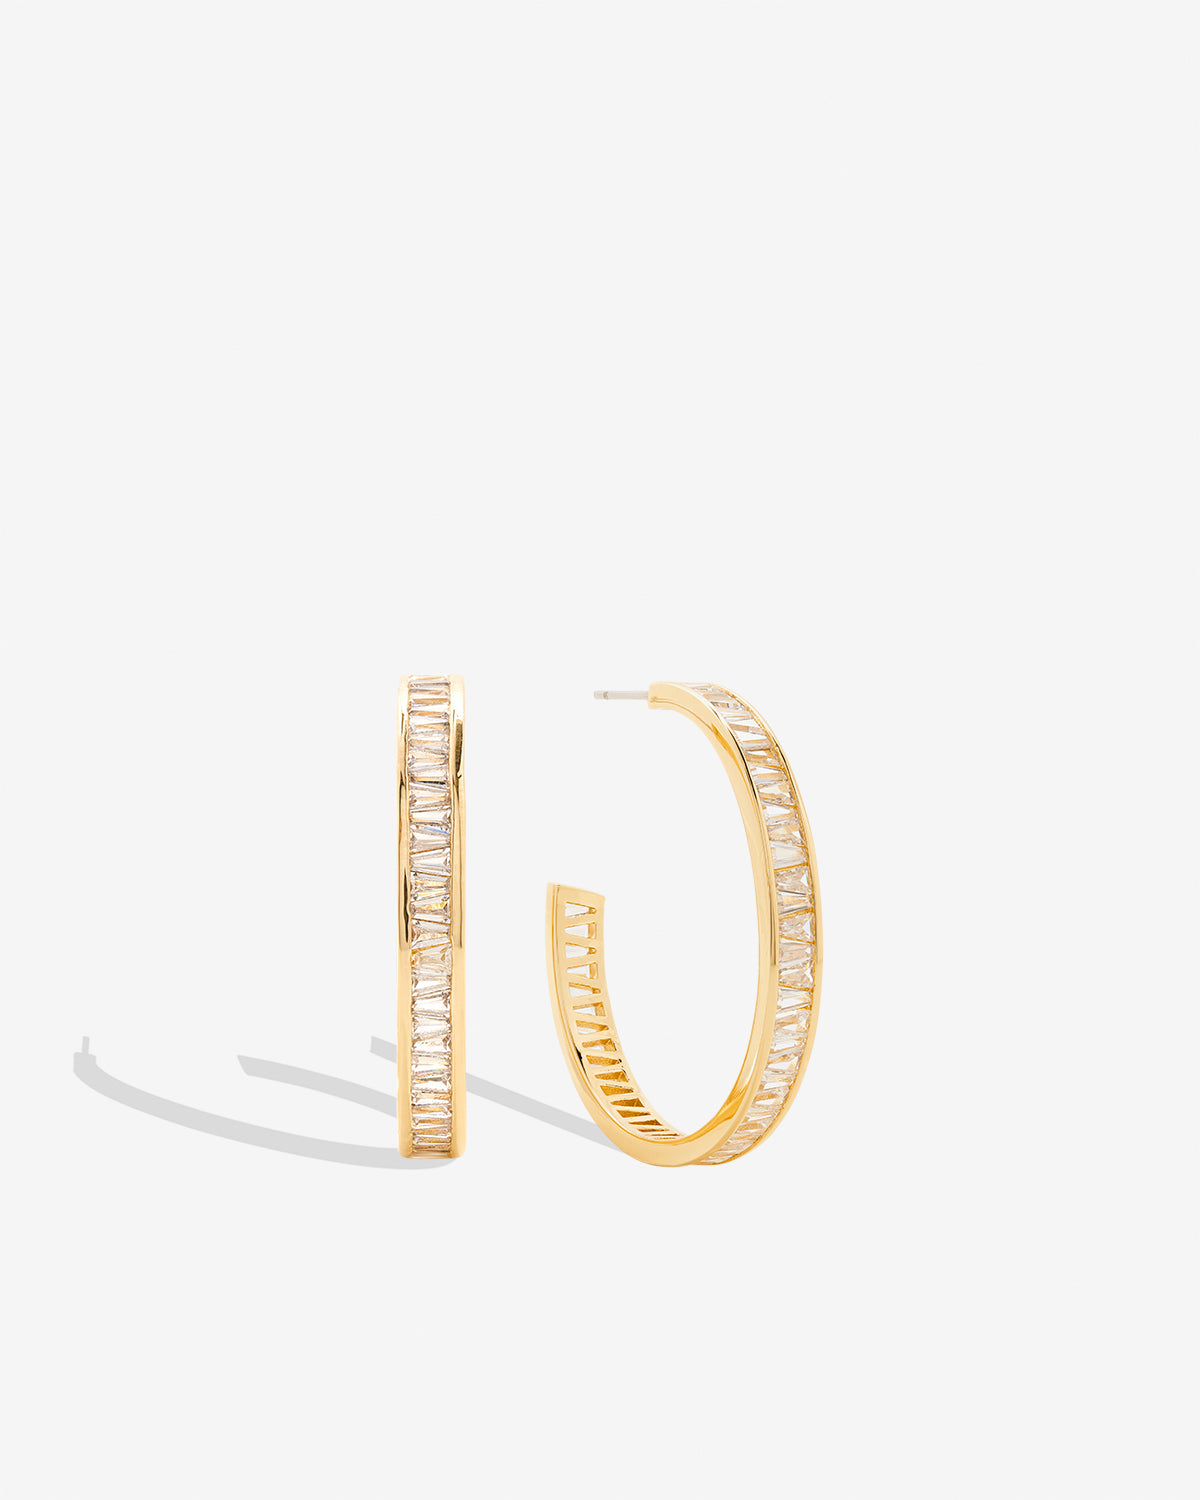 Bryan Anthonys Radiance Collection Baguette Maxi Hoop Earrings Gold